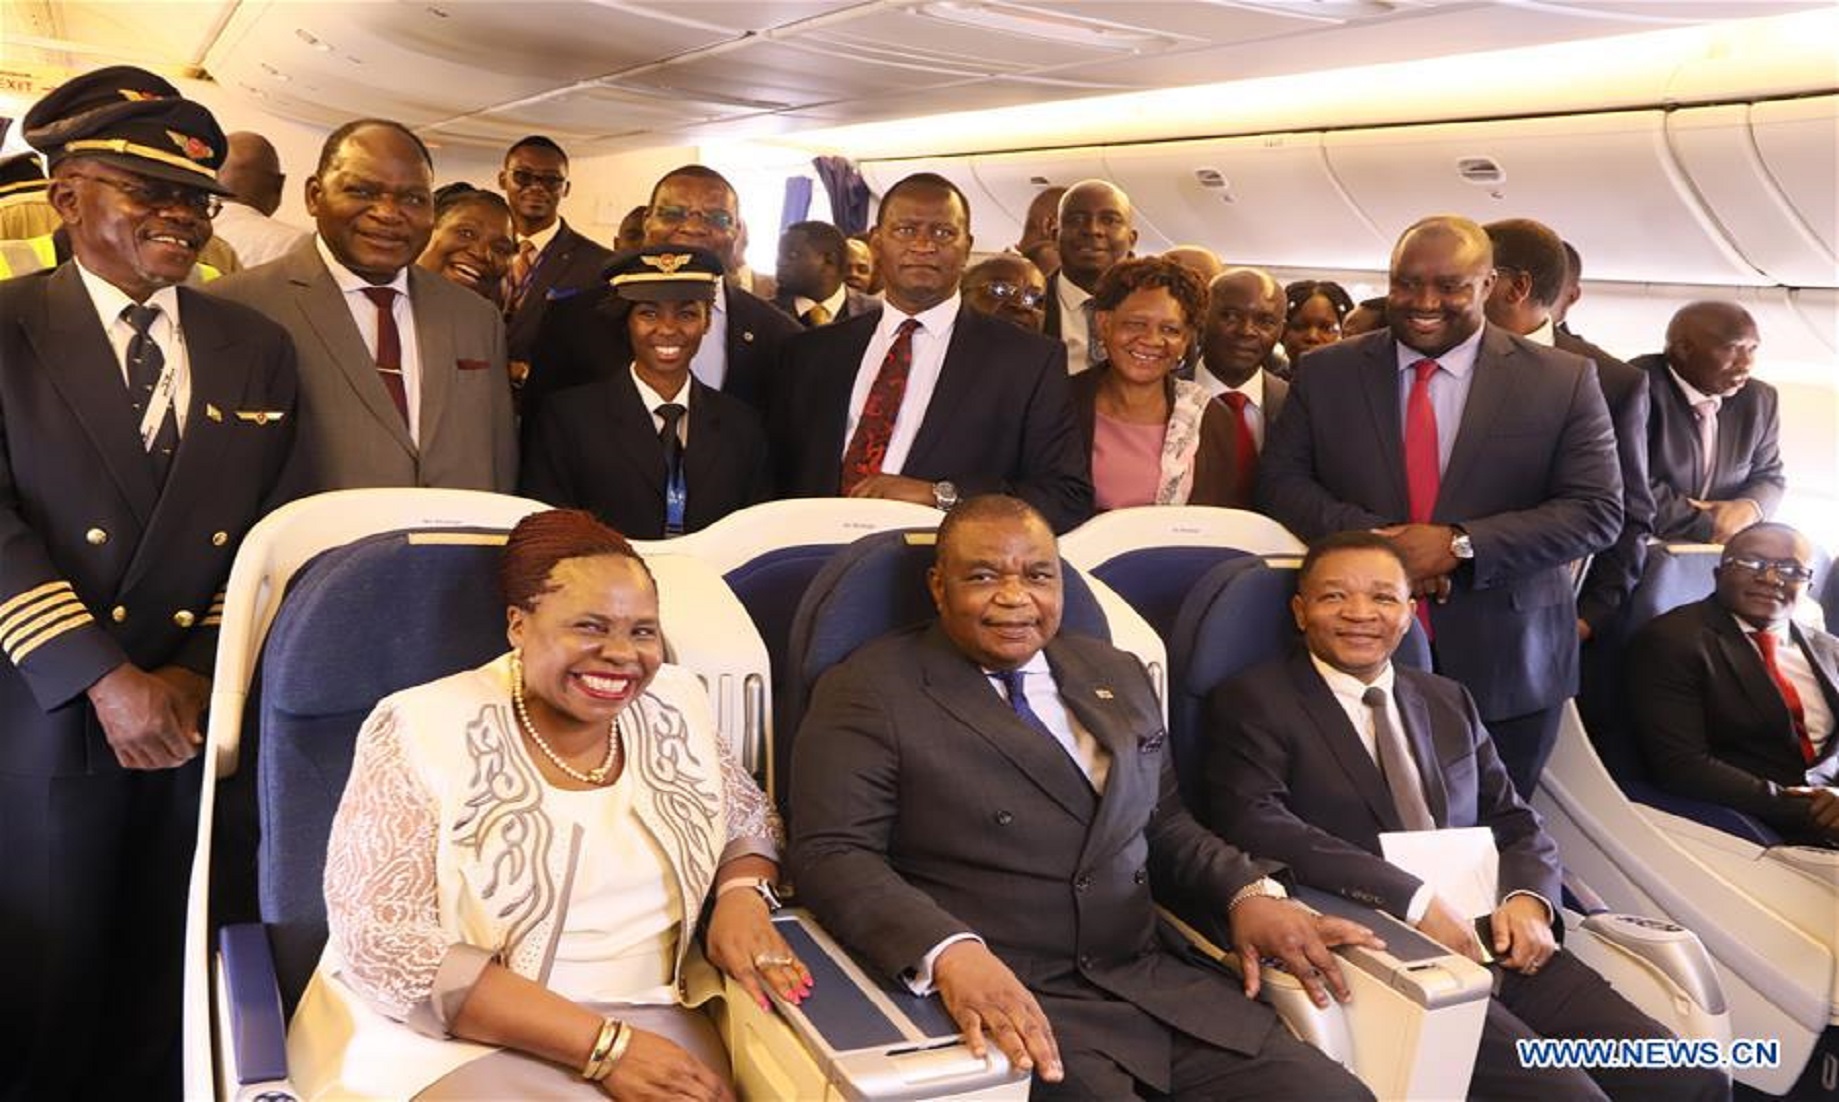 Zimbabwe Acquires Aircraft From Malaysia To Boost State Airline Operations